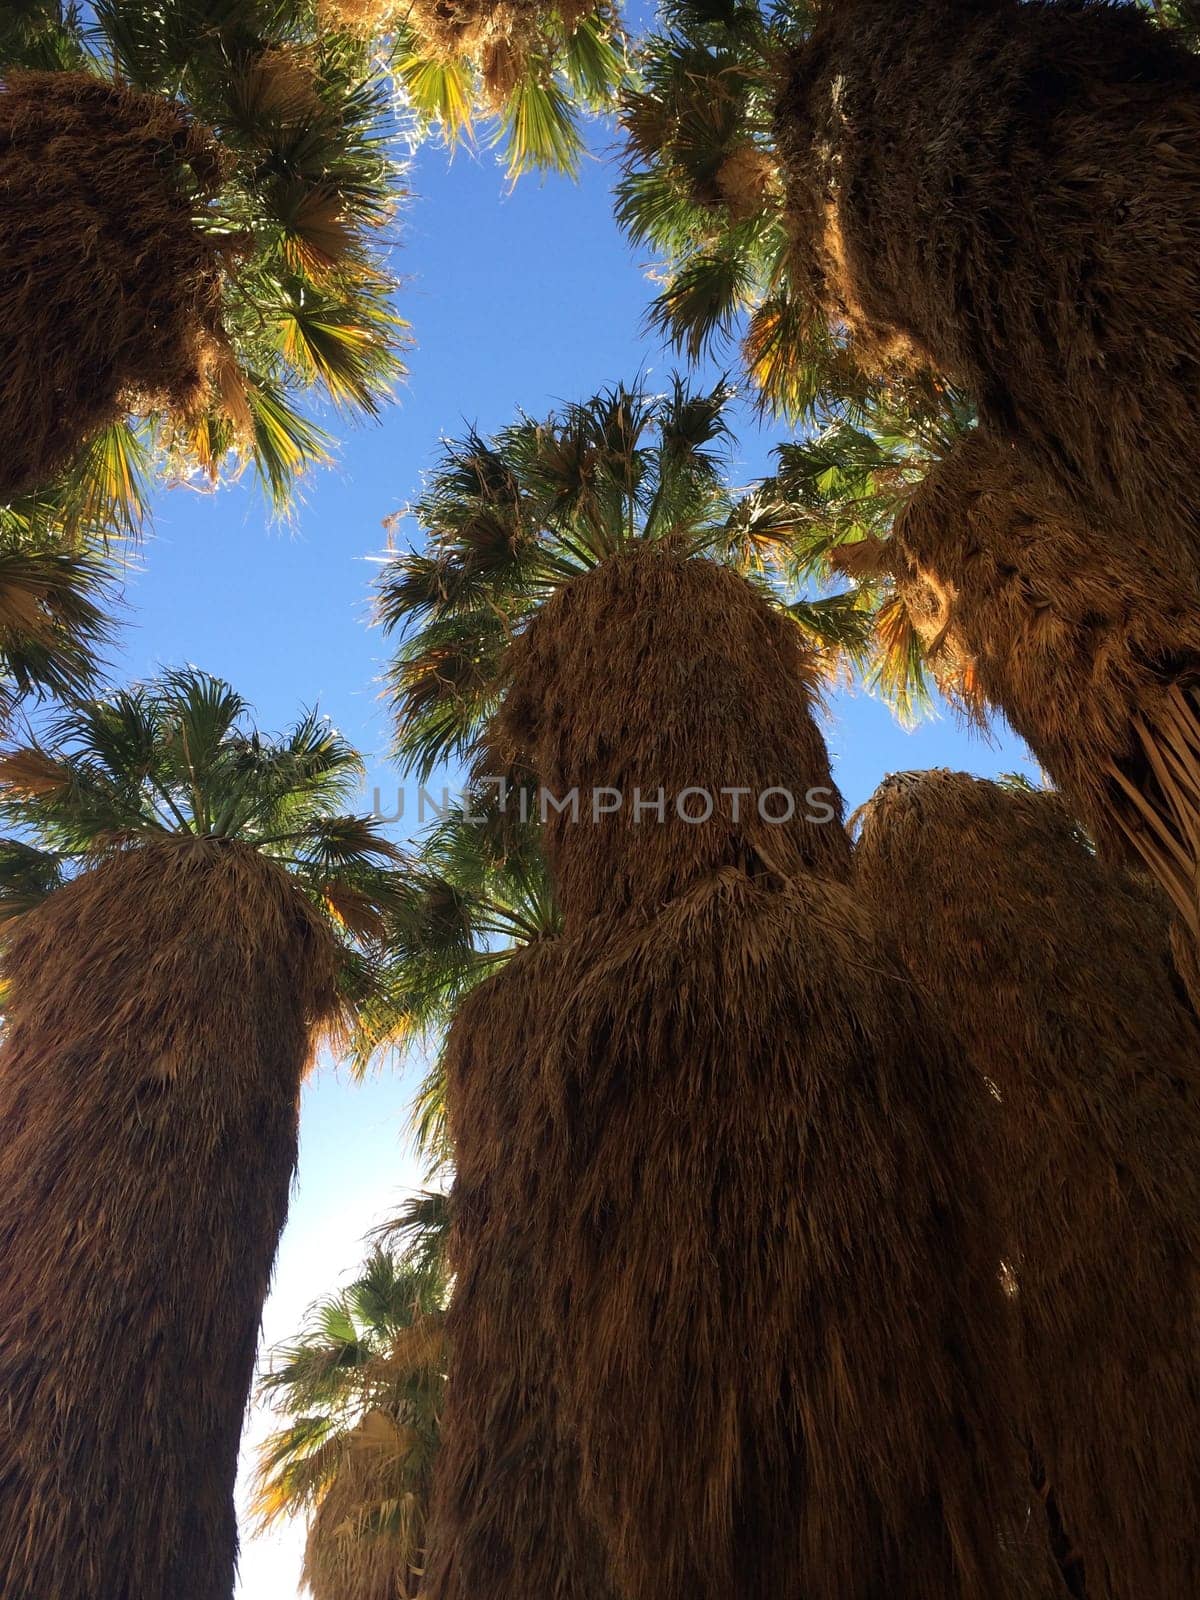 Palm Canyon Oasis, Palm Tree Grove, in Anza Borrego Desert State Park. High quality photo